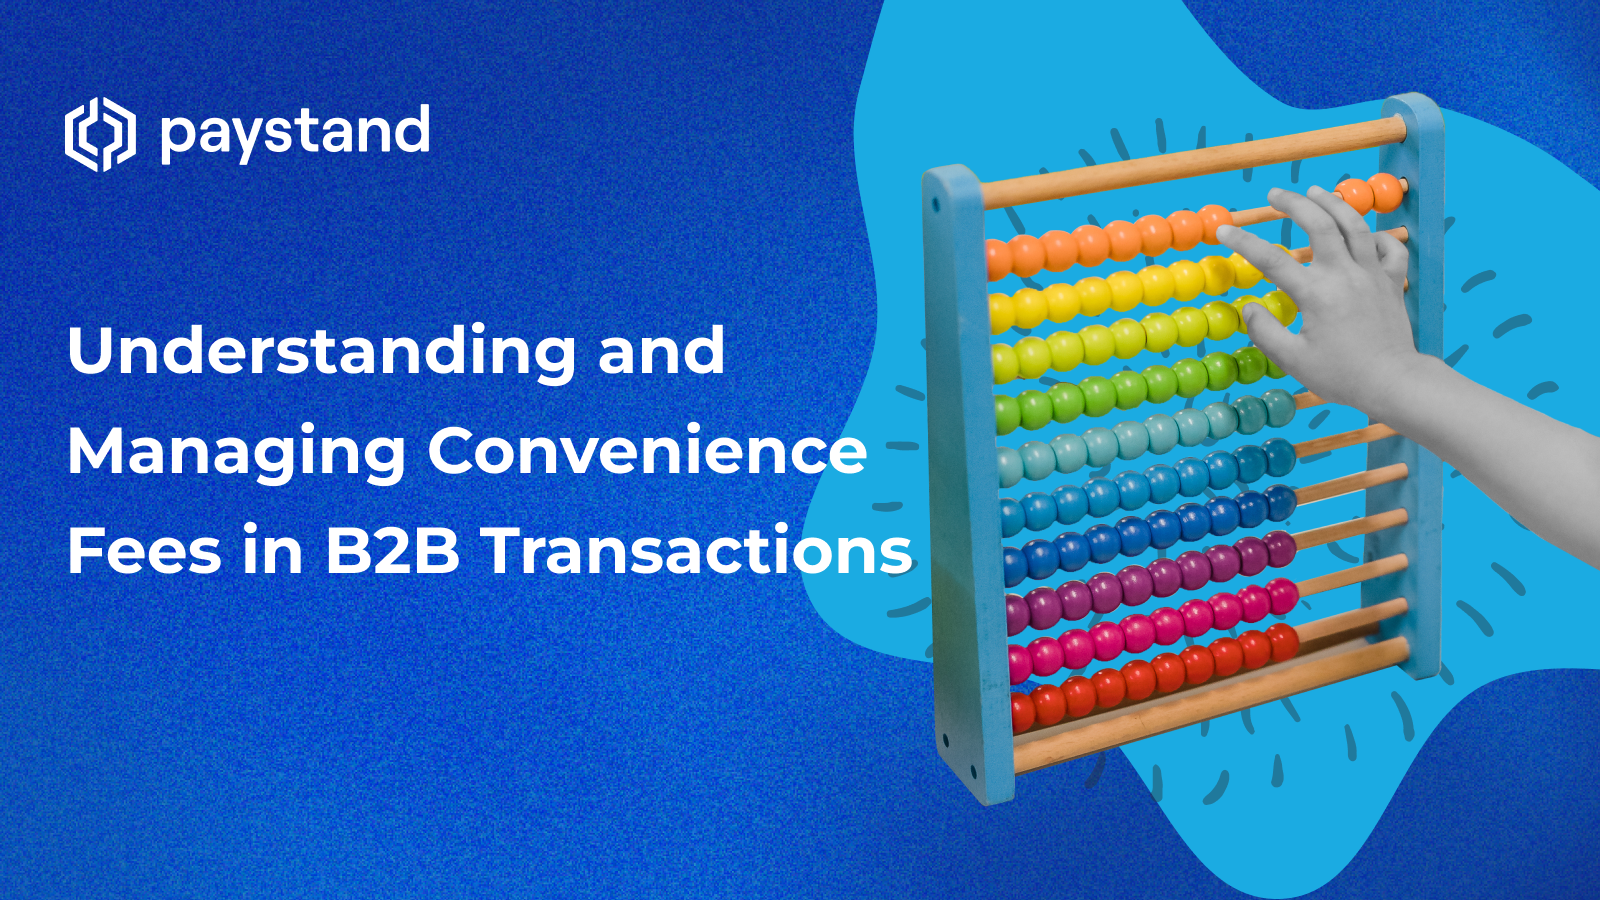 Understanding and Managing Convenience Fees in B2B Transactions